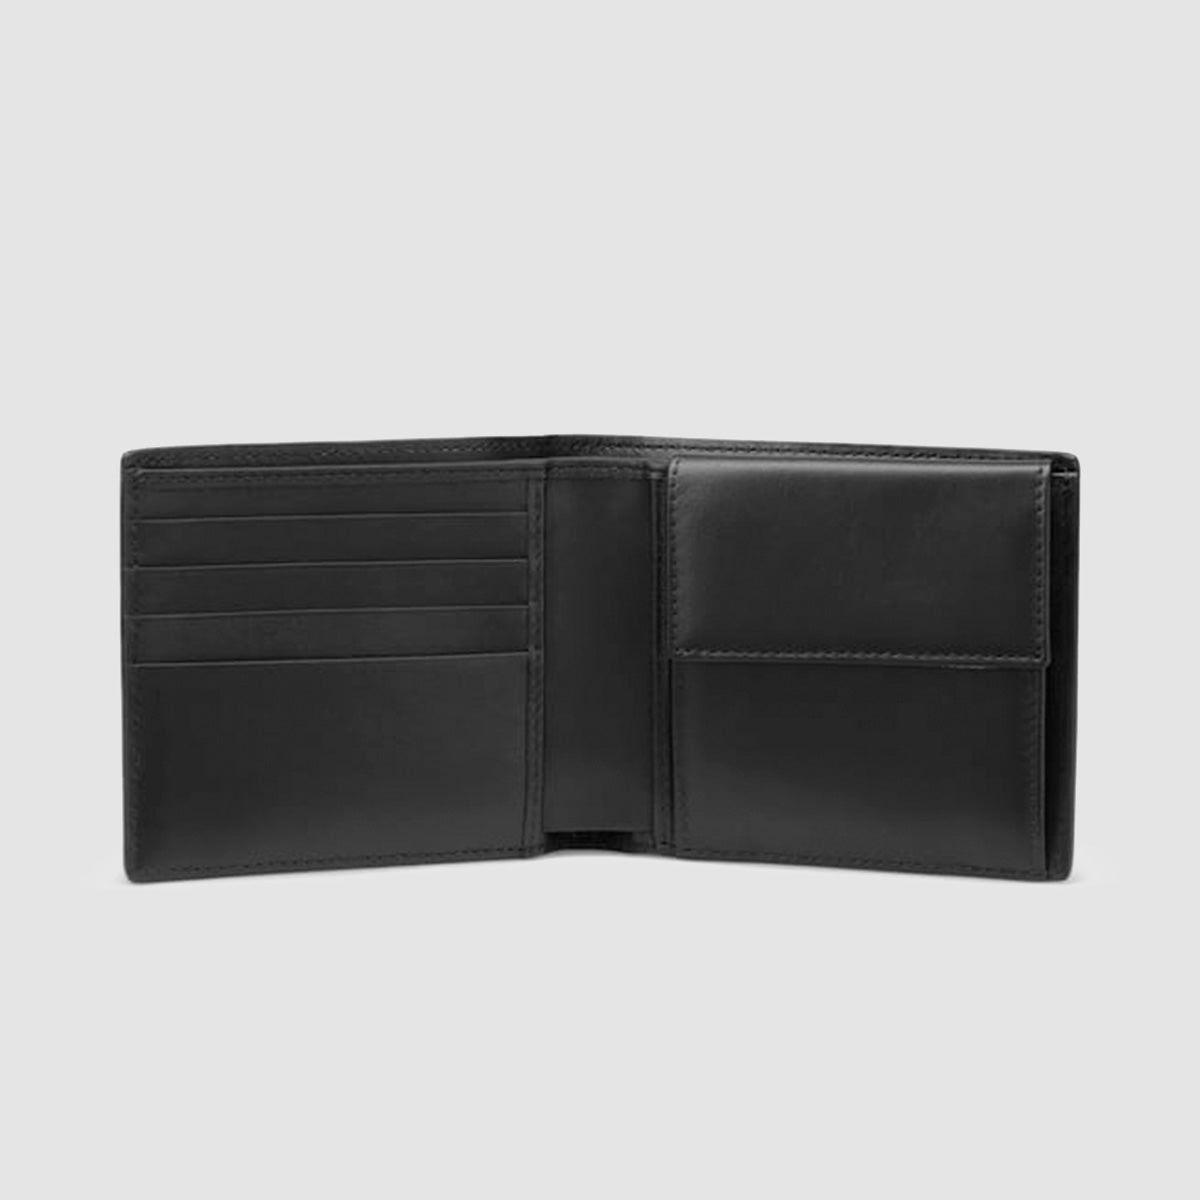 4 Card Slot Wallet with Coin Case in Panama - Black